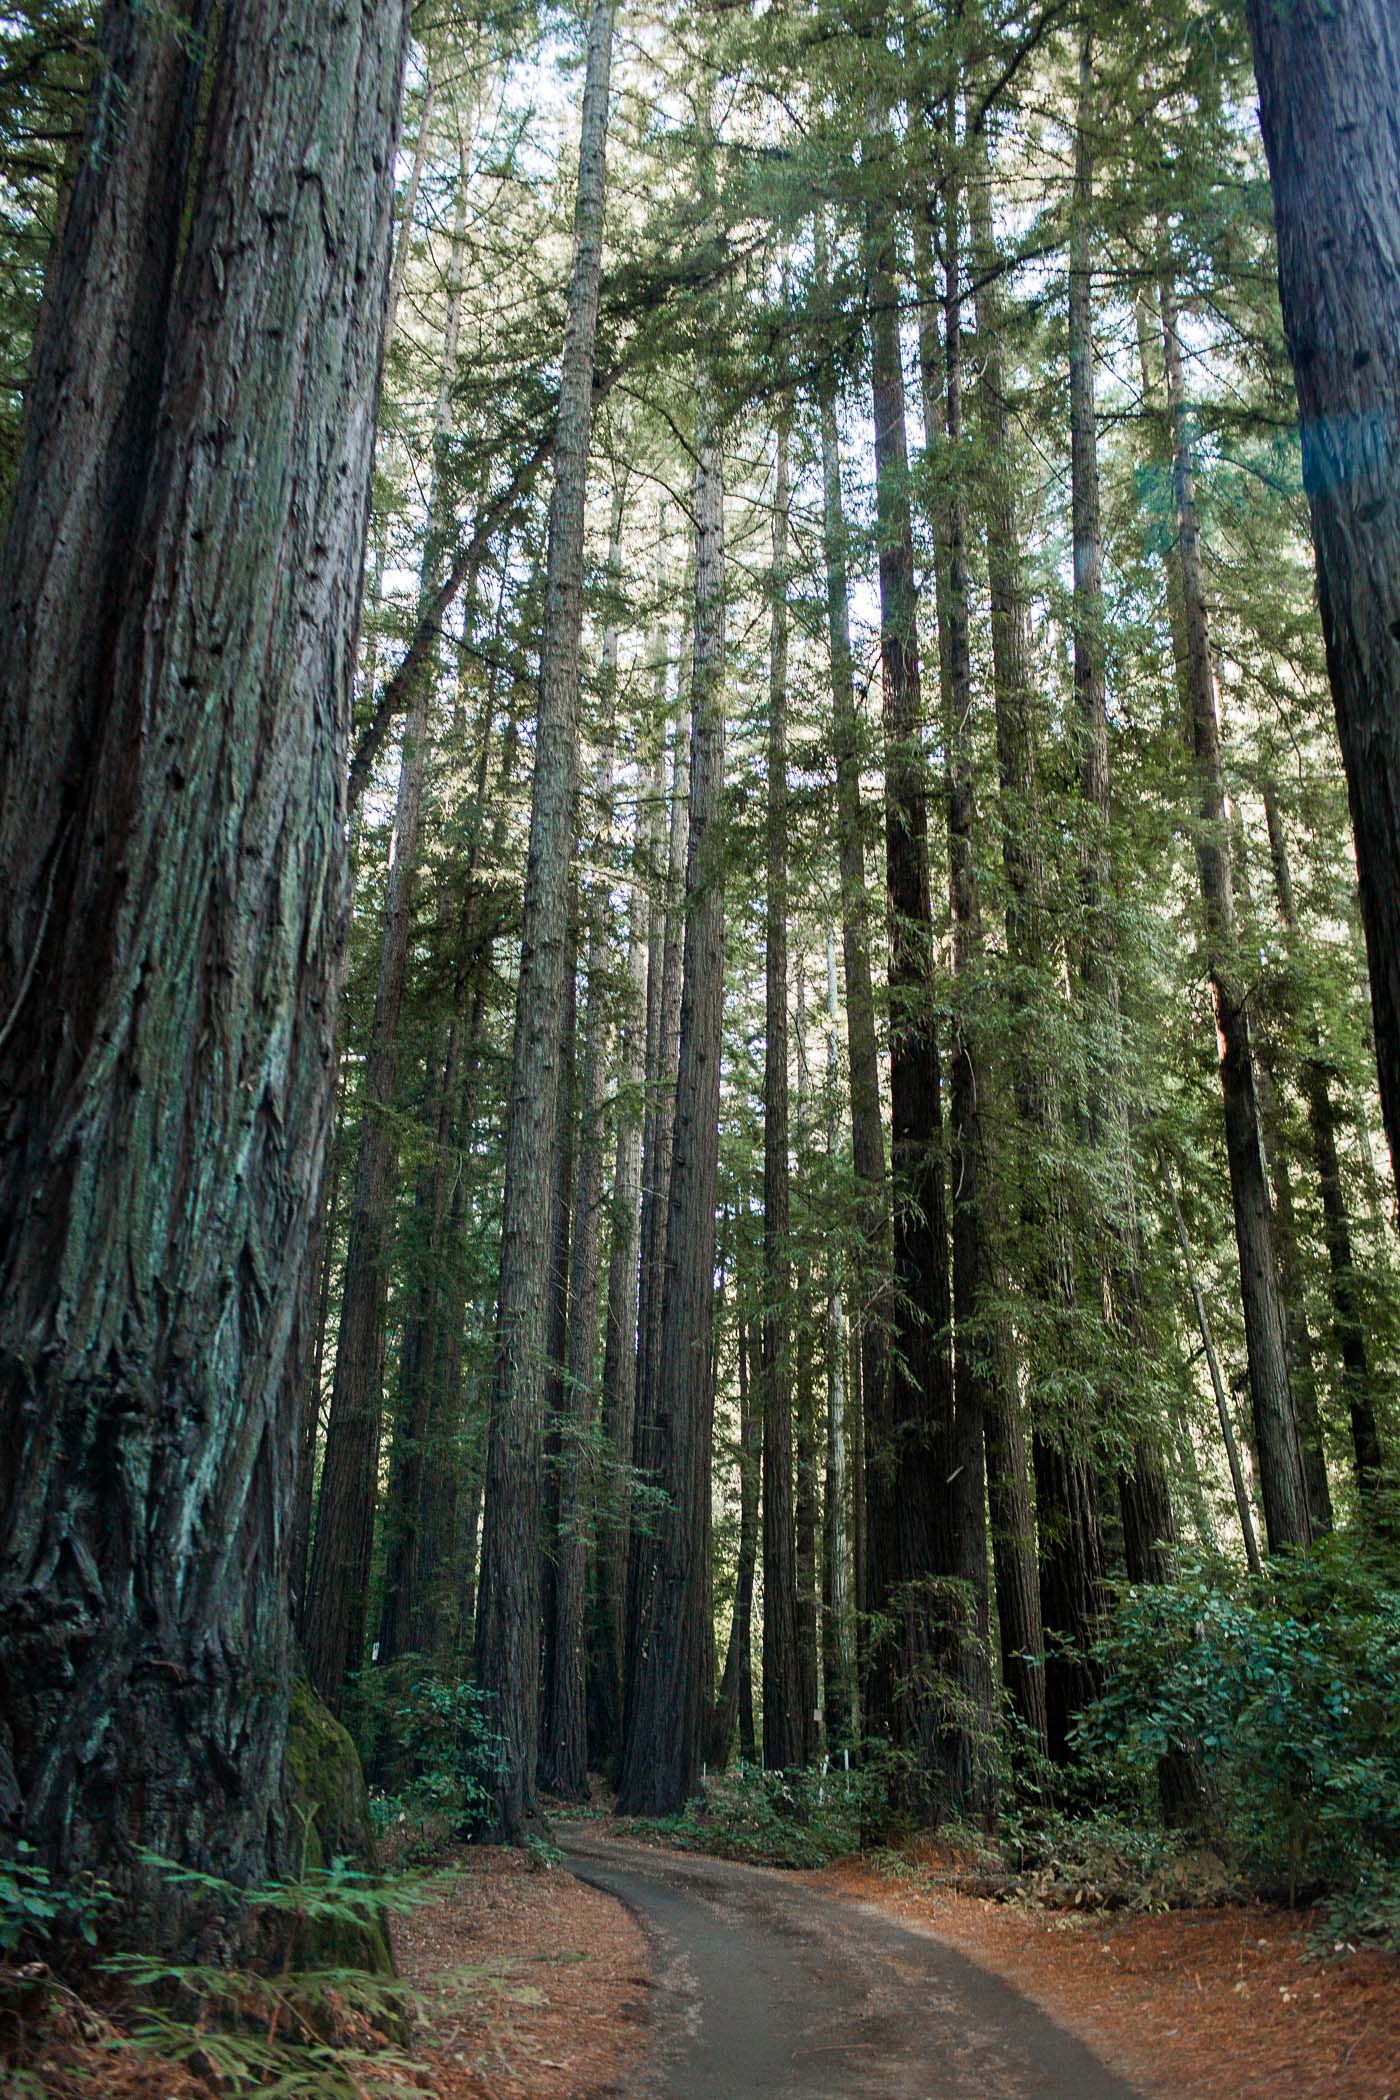 California redwoods, part of our 2015 year in review at www.hejdoll.com